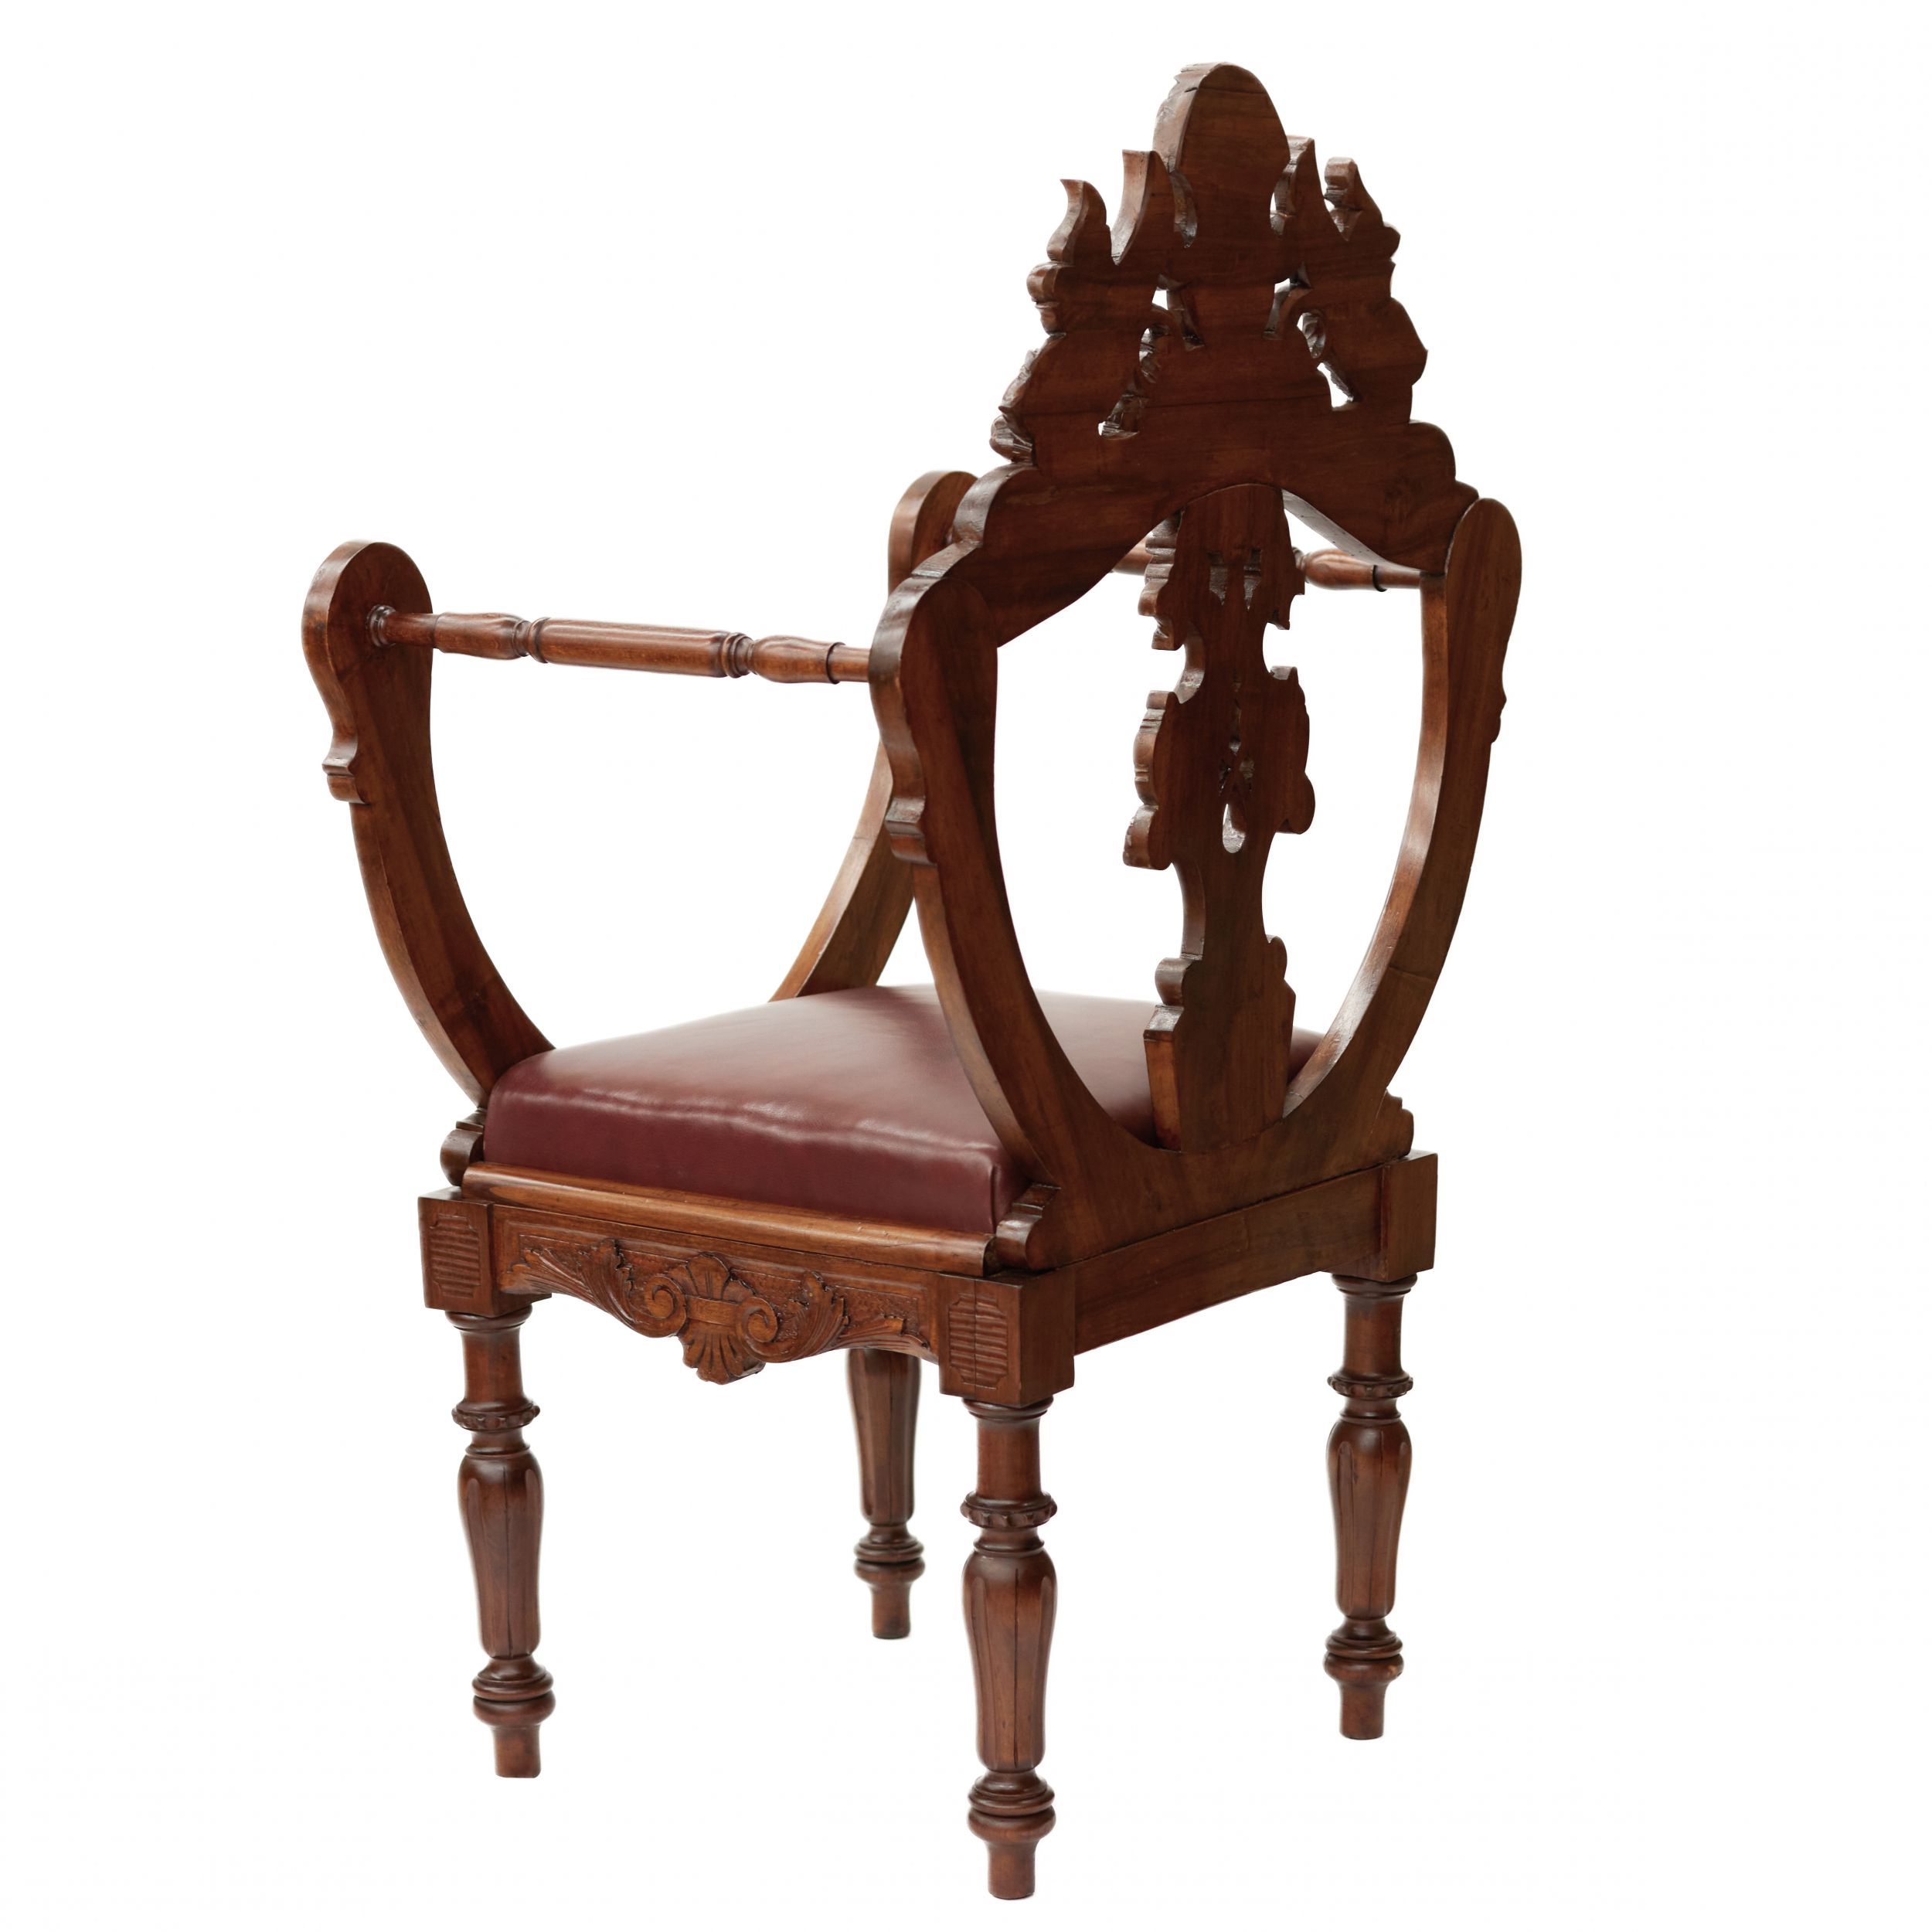 Carved, richly decorated walnut chair. 19th century - Image 6 of 6